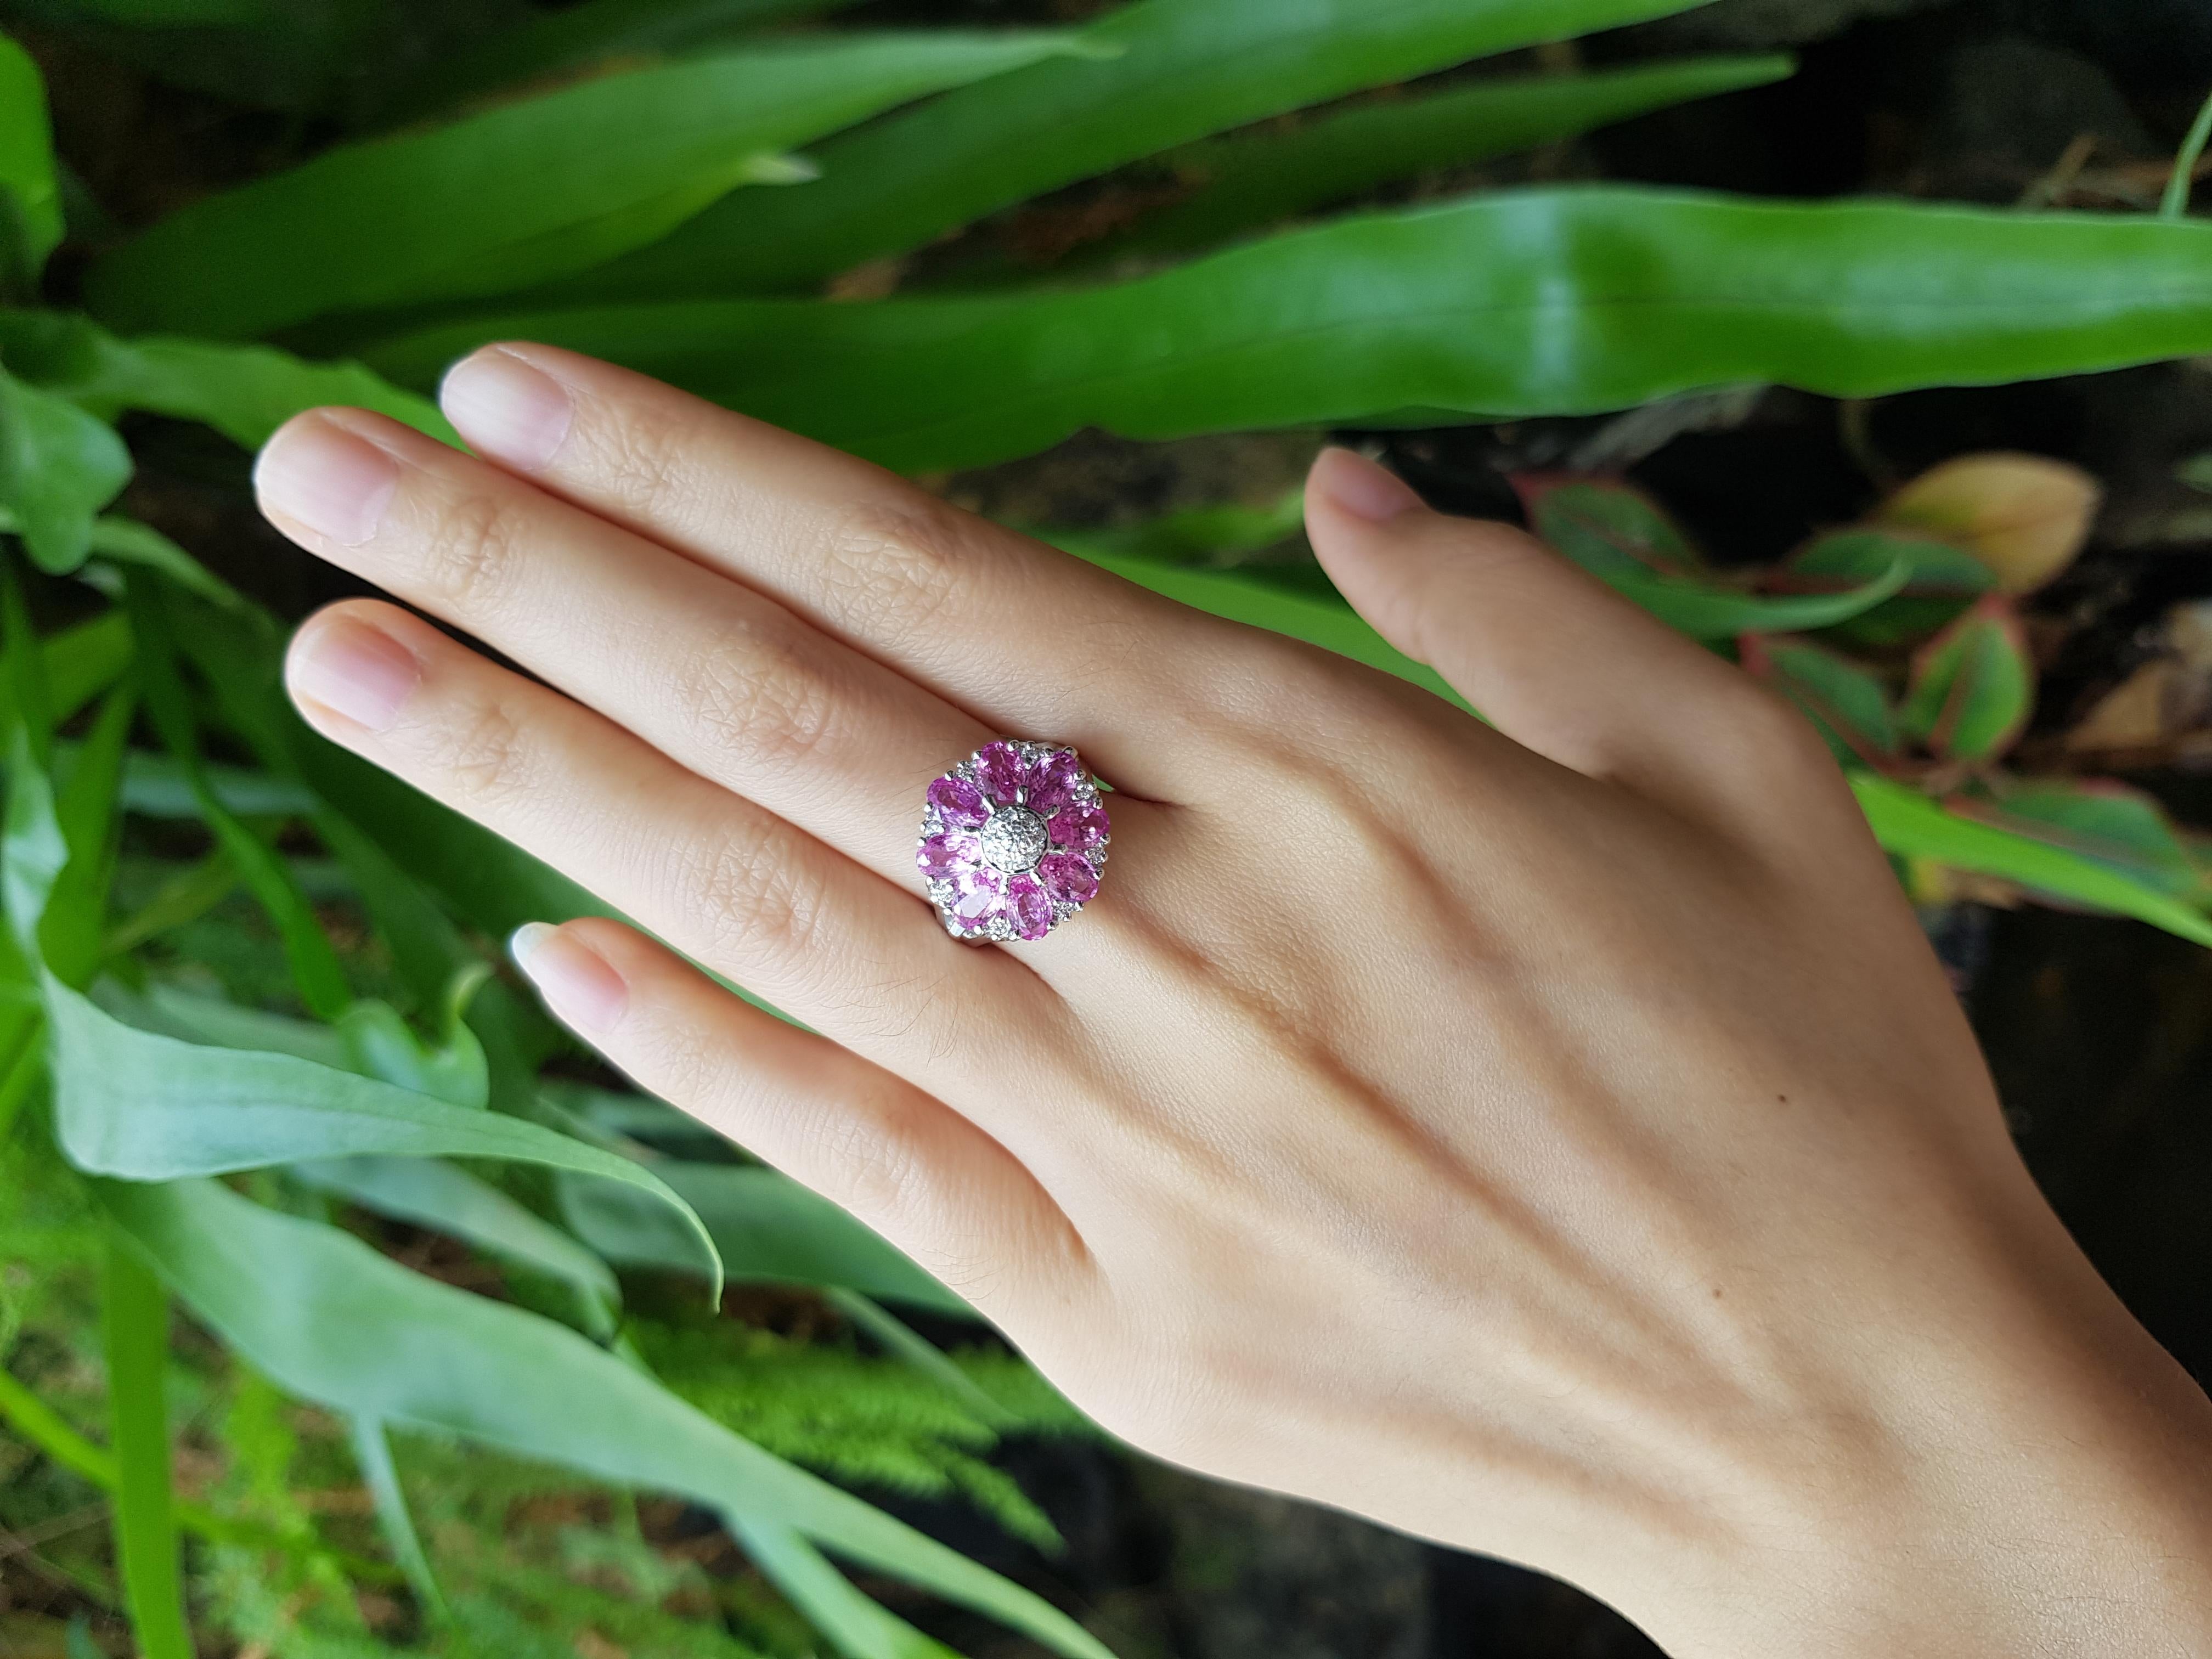 Pink Sapphire 3.99 carats with Diamond 0.20 carat Ring set in 18 Karat White Gold Settings

Width:  1.6 cm 
Length: 1.6 cm
Ring Size: 54
Total Weight: 8.88 grams

